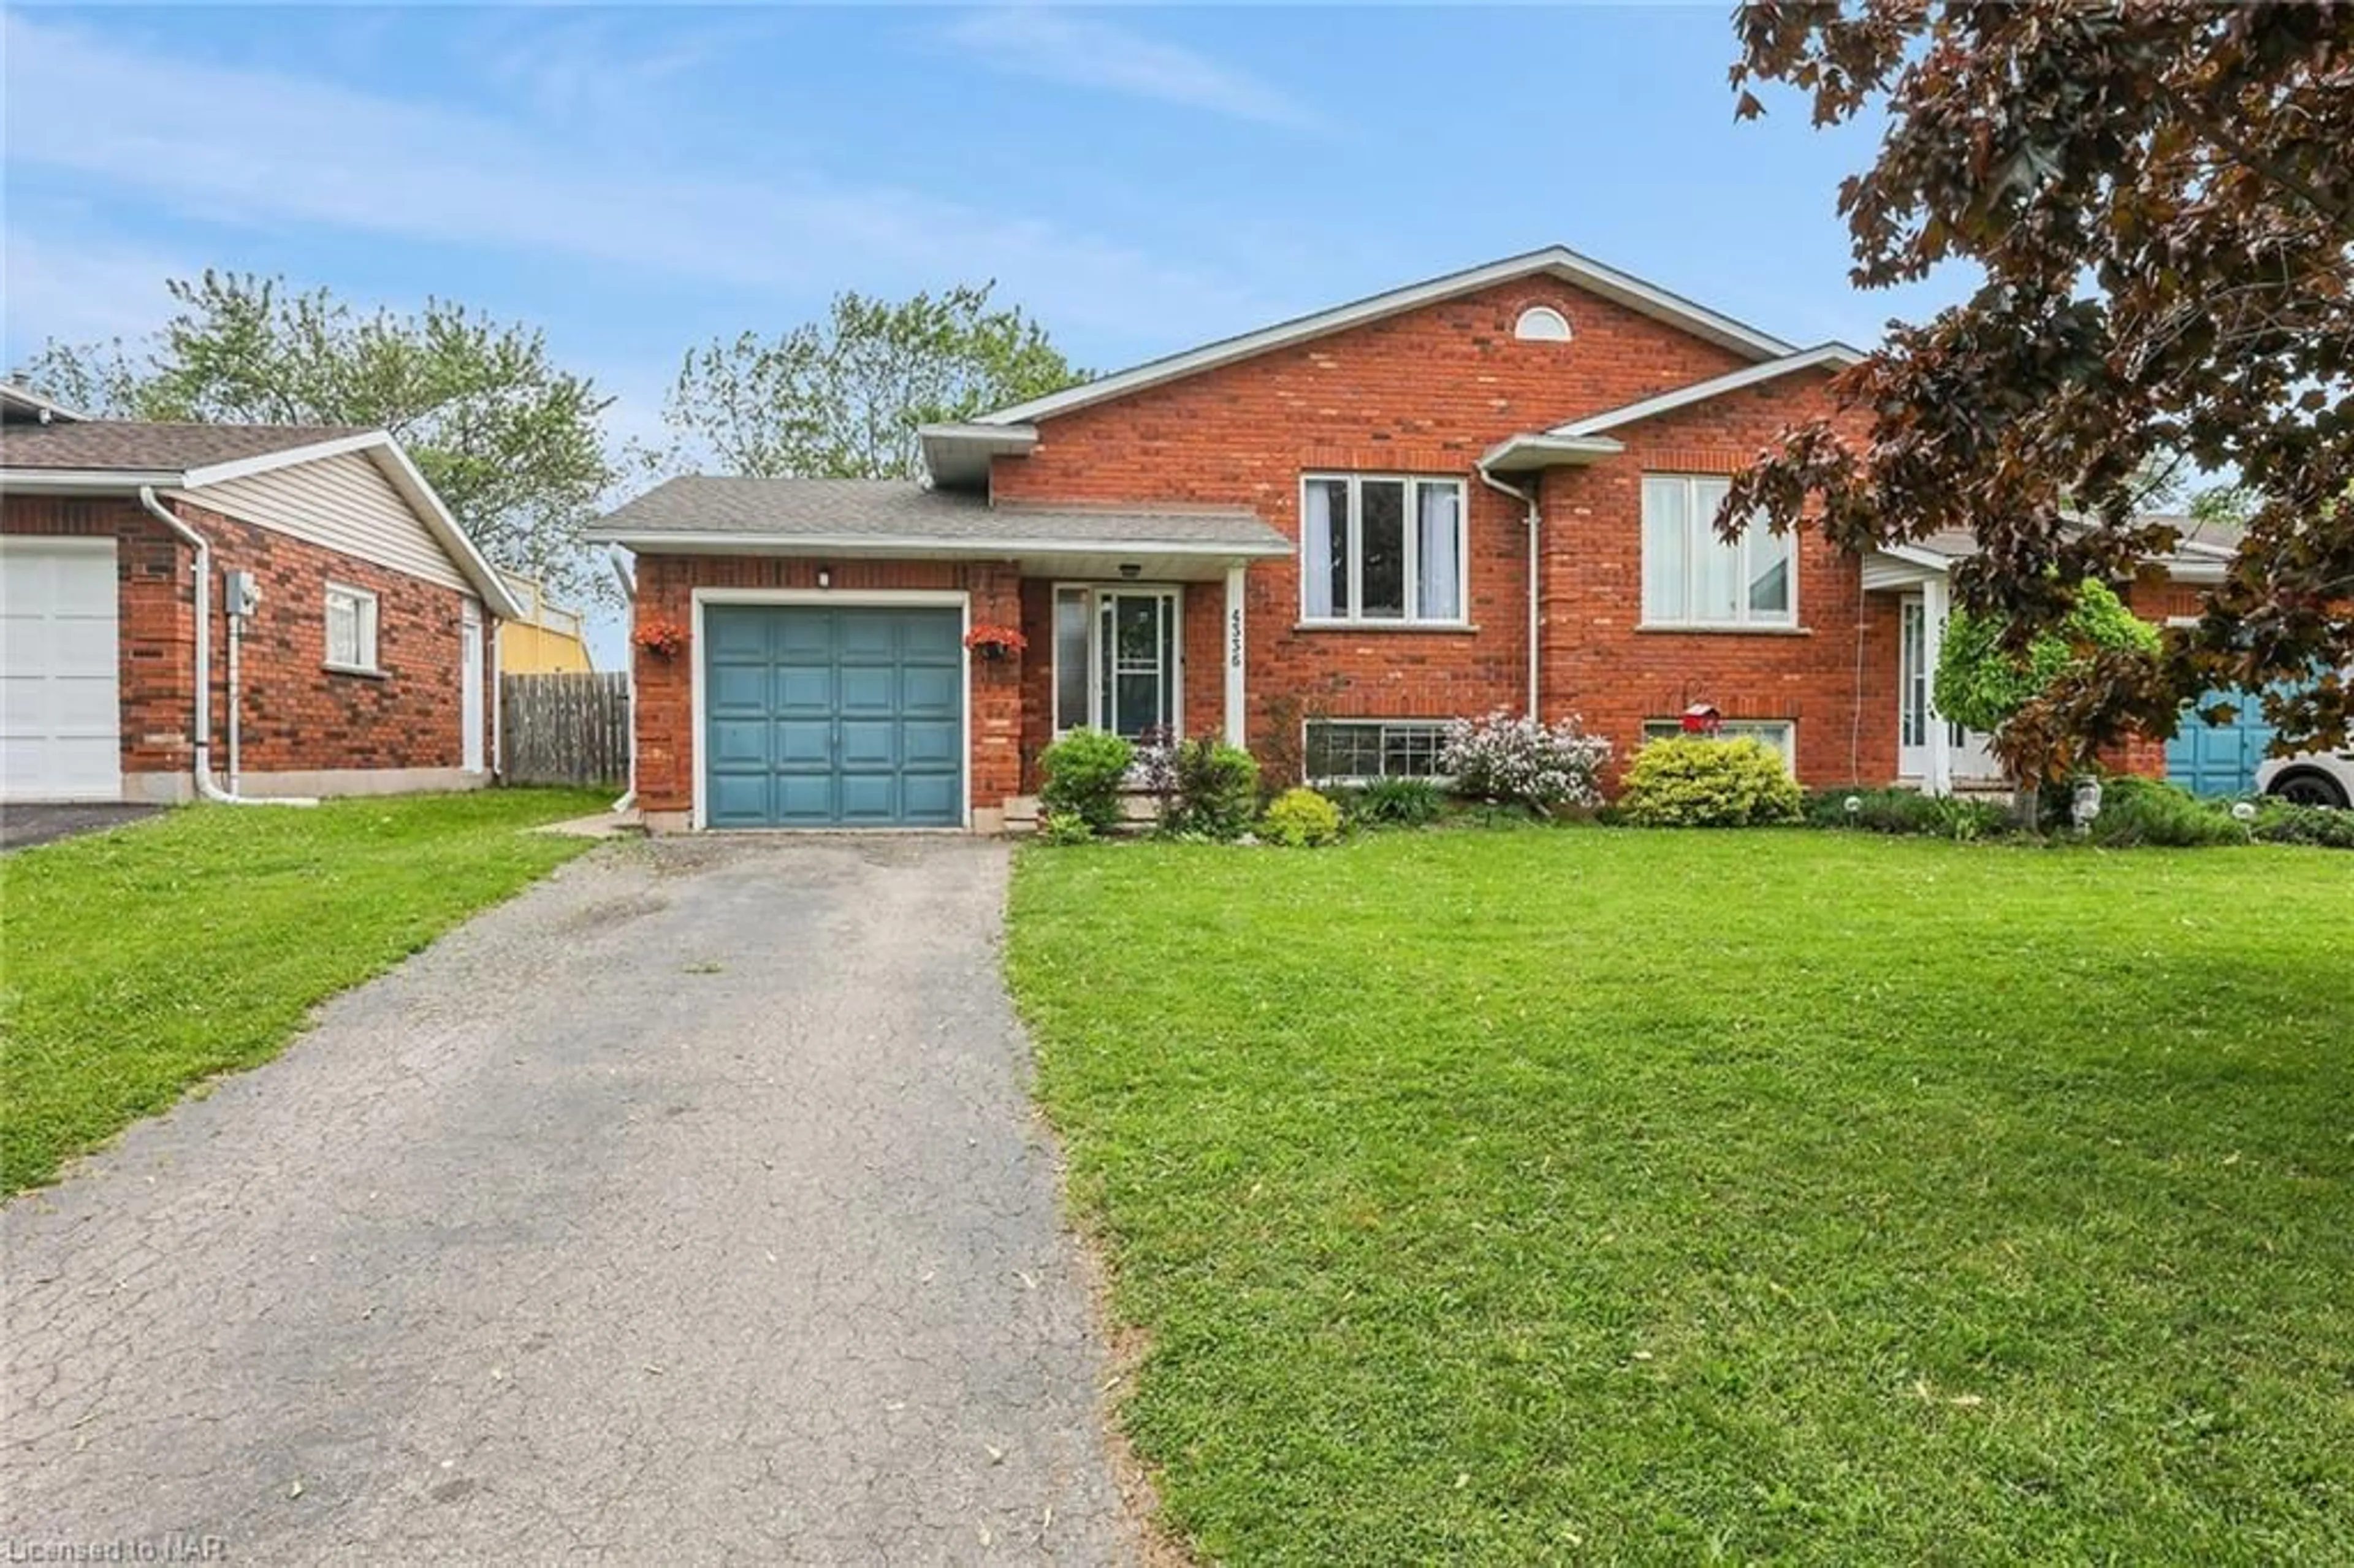 Home with brick exterior material for 4336 Concord Ave, Beamsville Ontario L0R 1B6